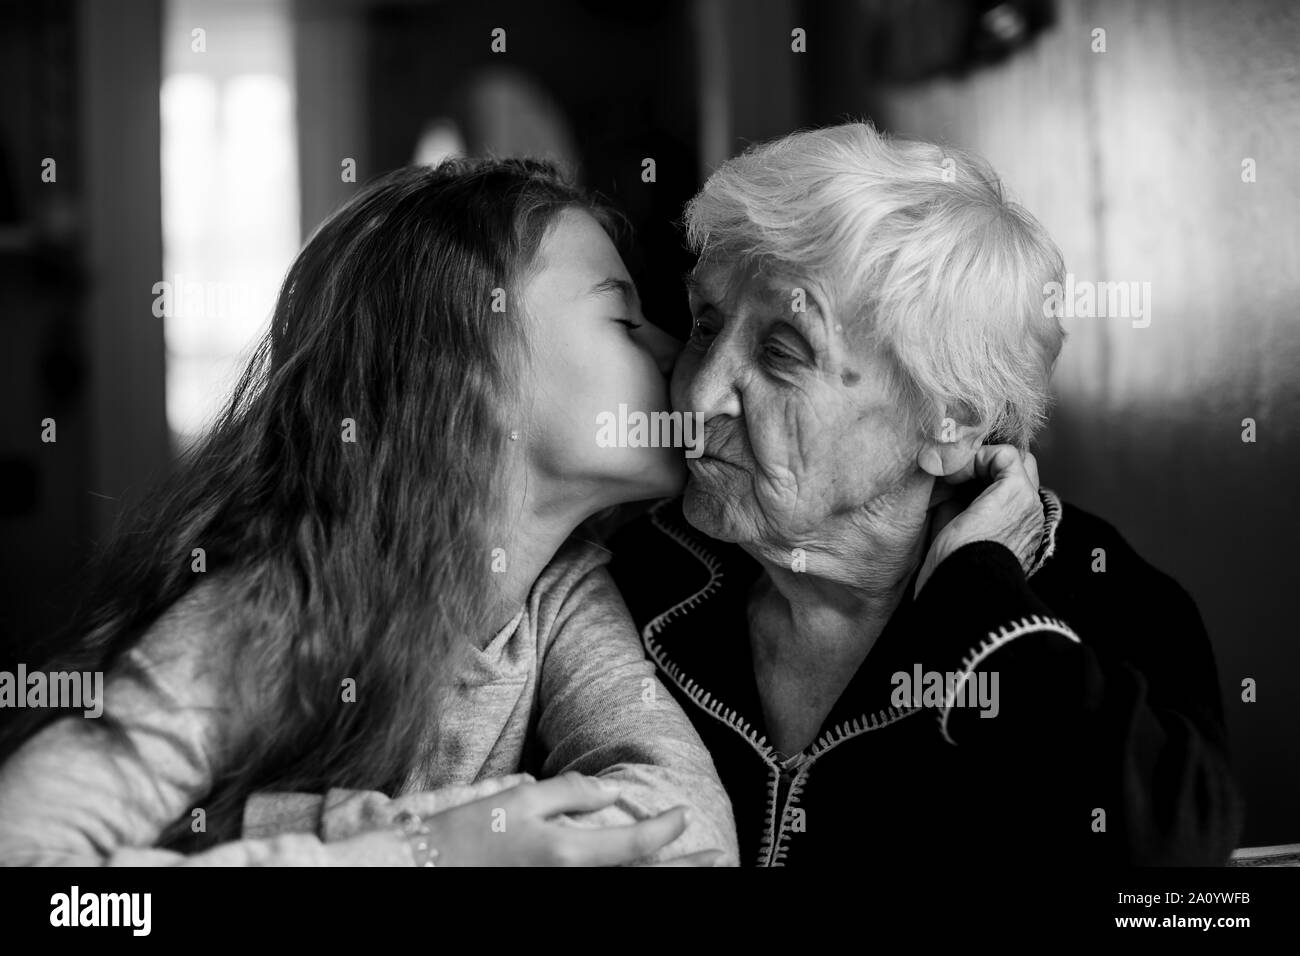 Elderly woman grandmother kiss with her little granddaughter. Black and white photo. Stock Photo